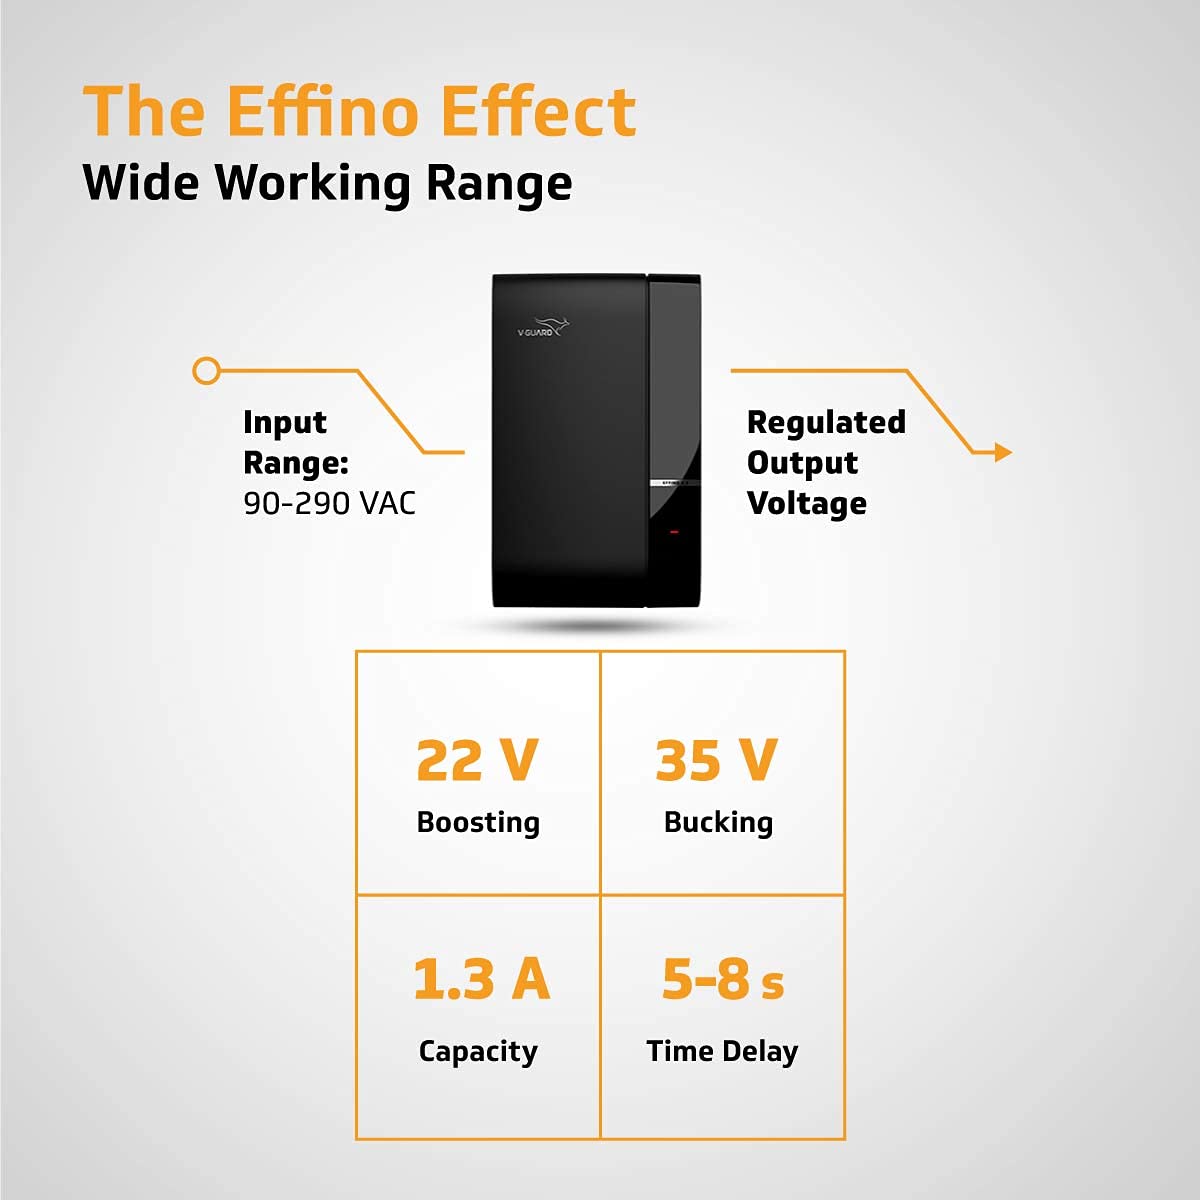 Effino 1.3 TV Stabilizer  Applicable for Smart TV's up to 82cm (32') +Set Top Box ,Home Theatre/Gaming Console